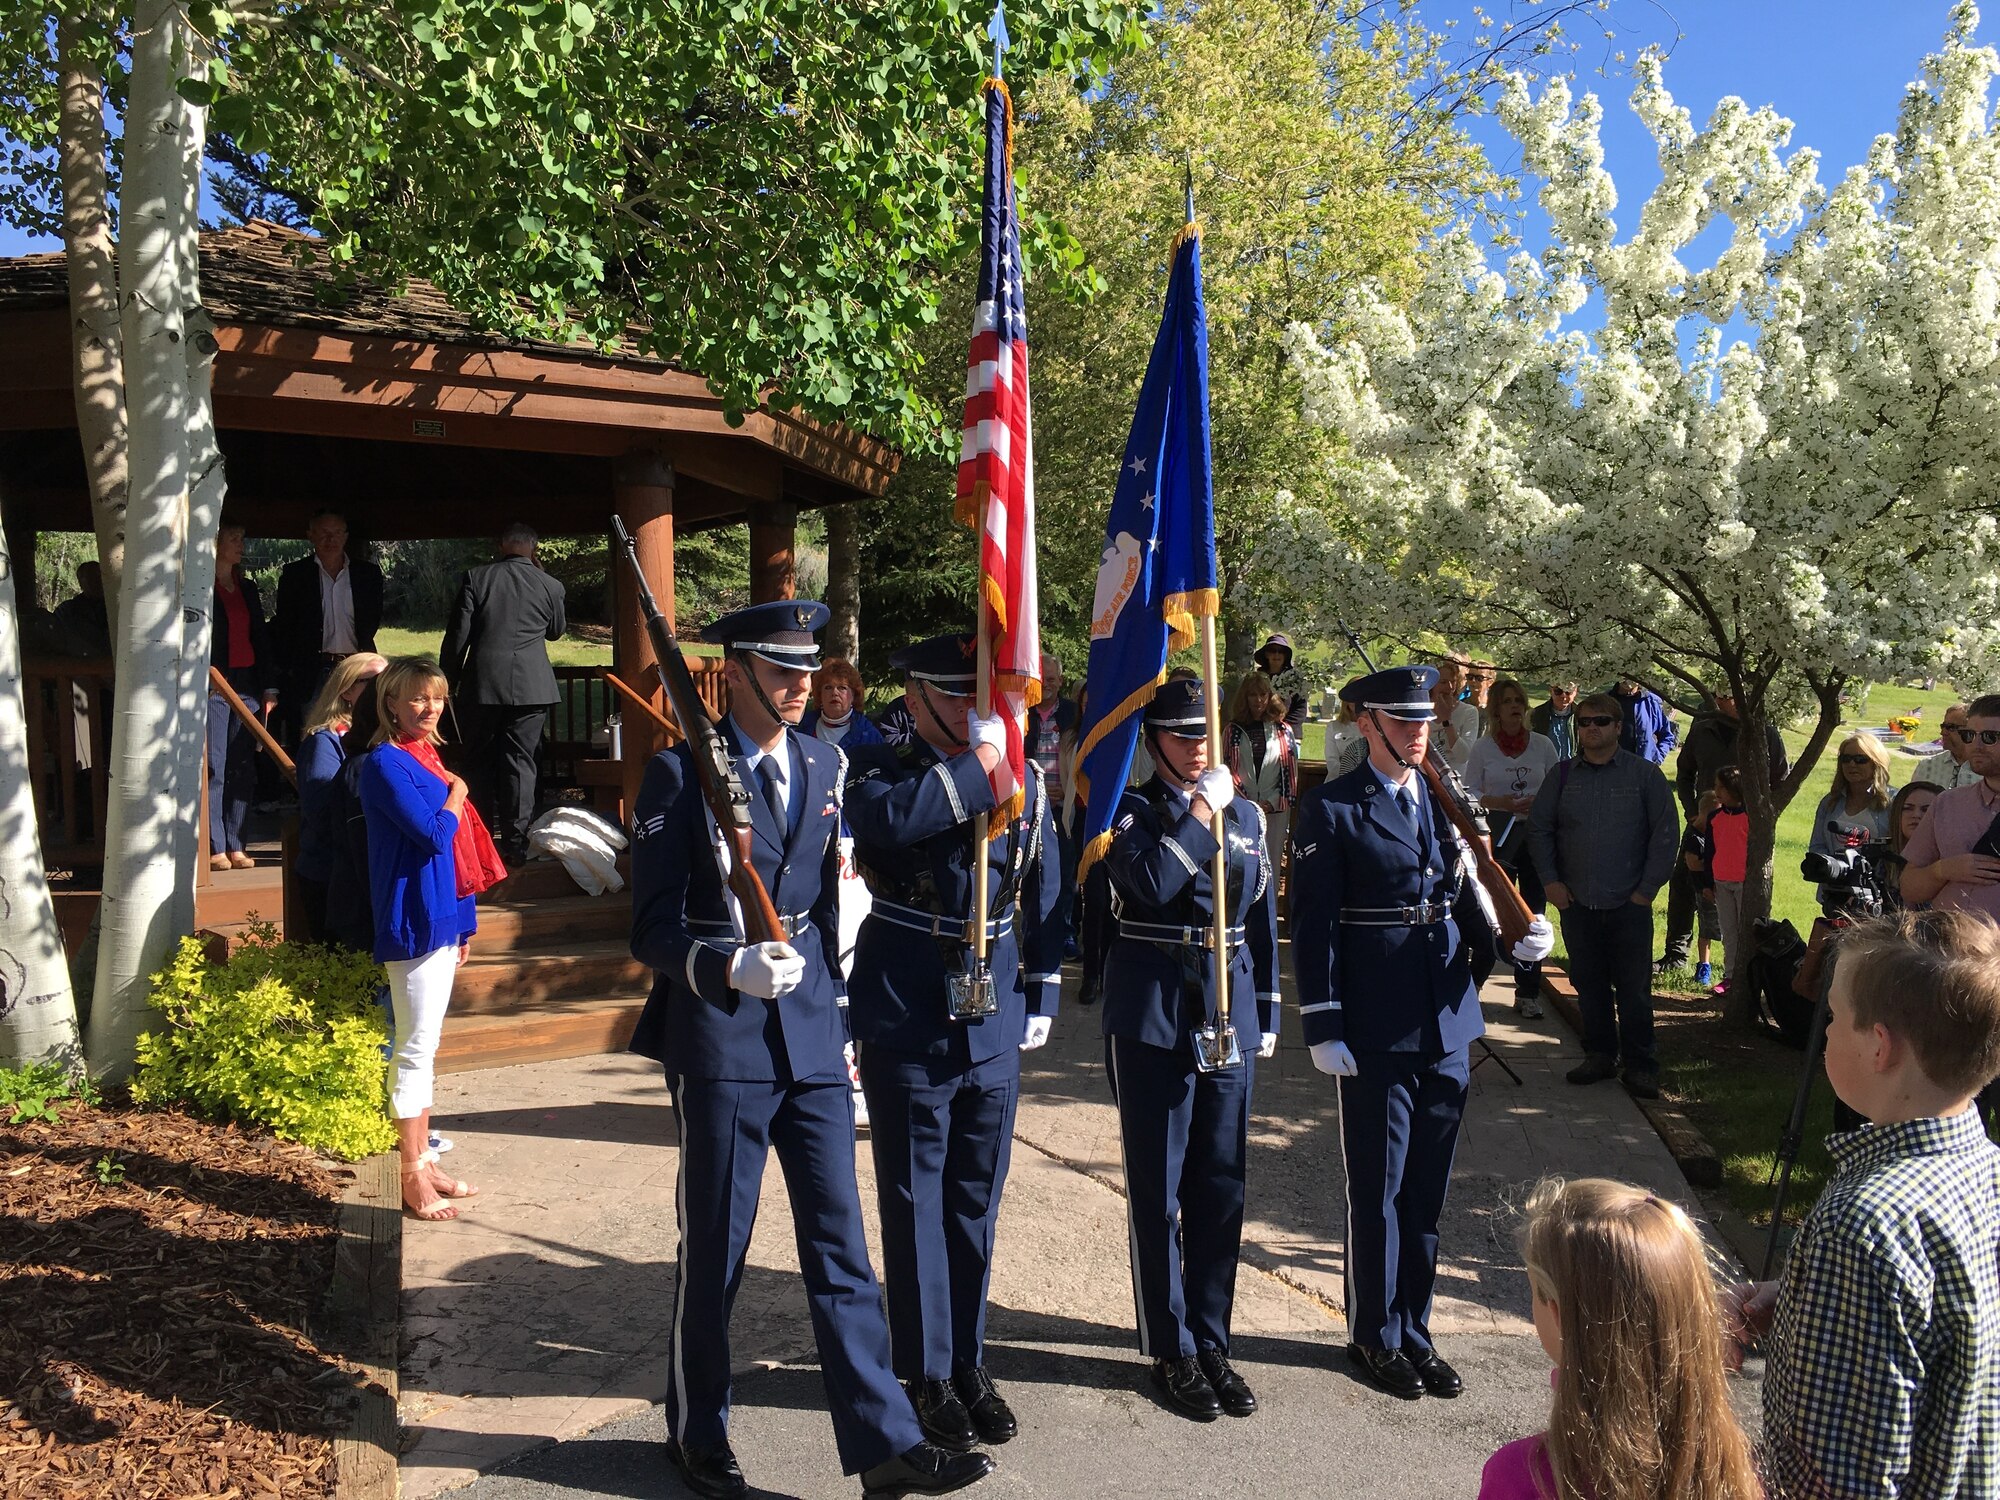 The Hill Air Force Base Honor Guard presents the colors during a tribute May 28, 2018, at Park City, Utah, to honor the Airmen involved in a B-18 bomber crash that occurred in 1941. Two of the seven crew members lost their lives in the accident at Iron Mountain near Park City. (Courtesy photo)